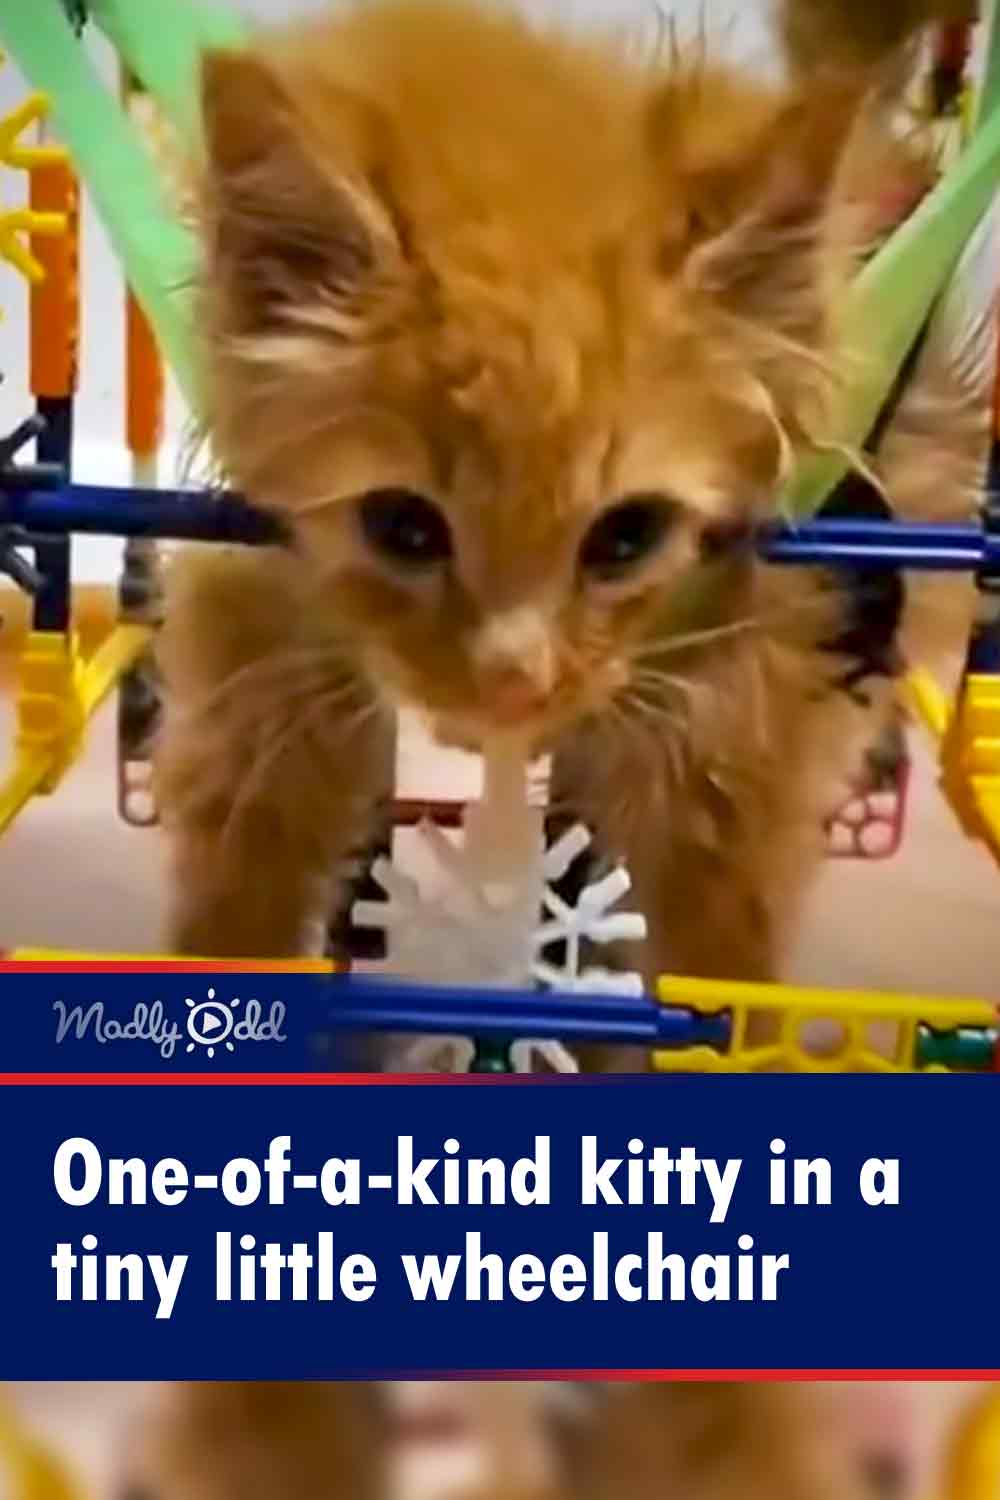 One-of-a-kind kitty in a tiny little wheelchair